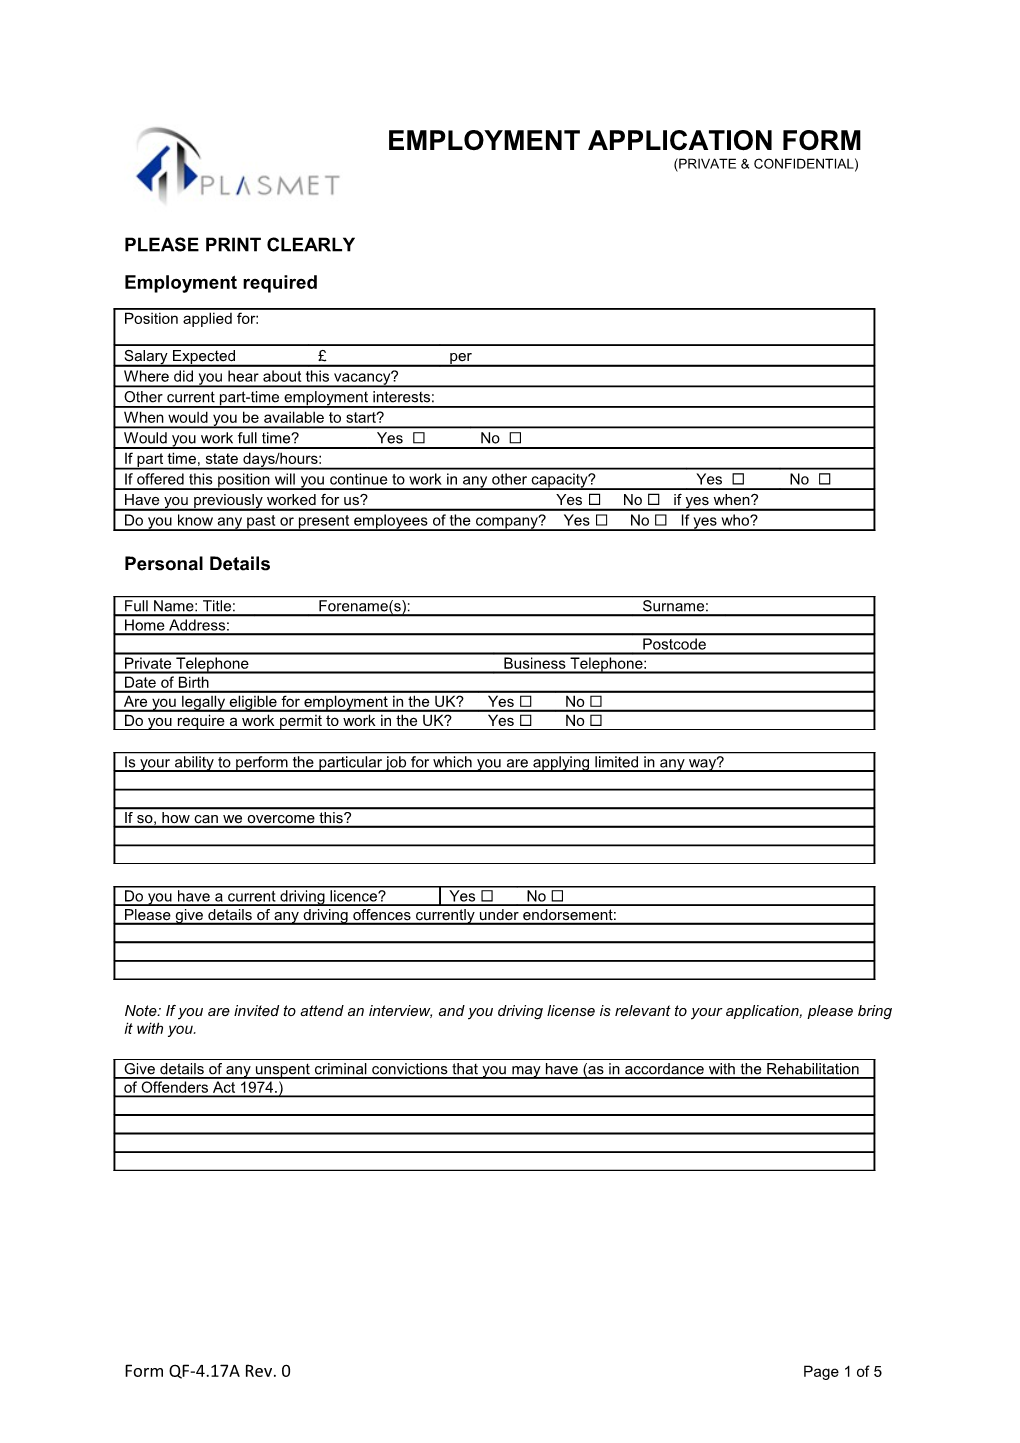 Employment Application Form (Private & Confidential)